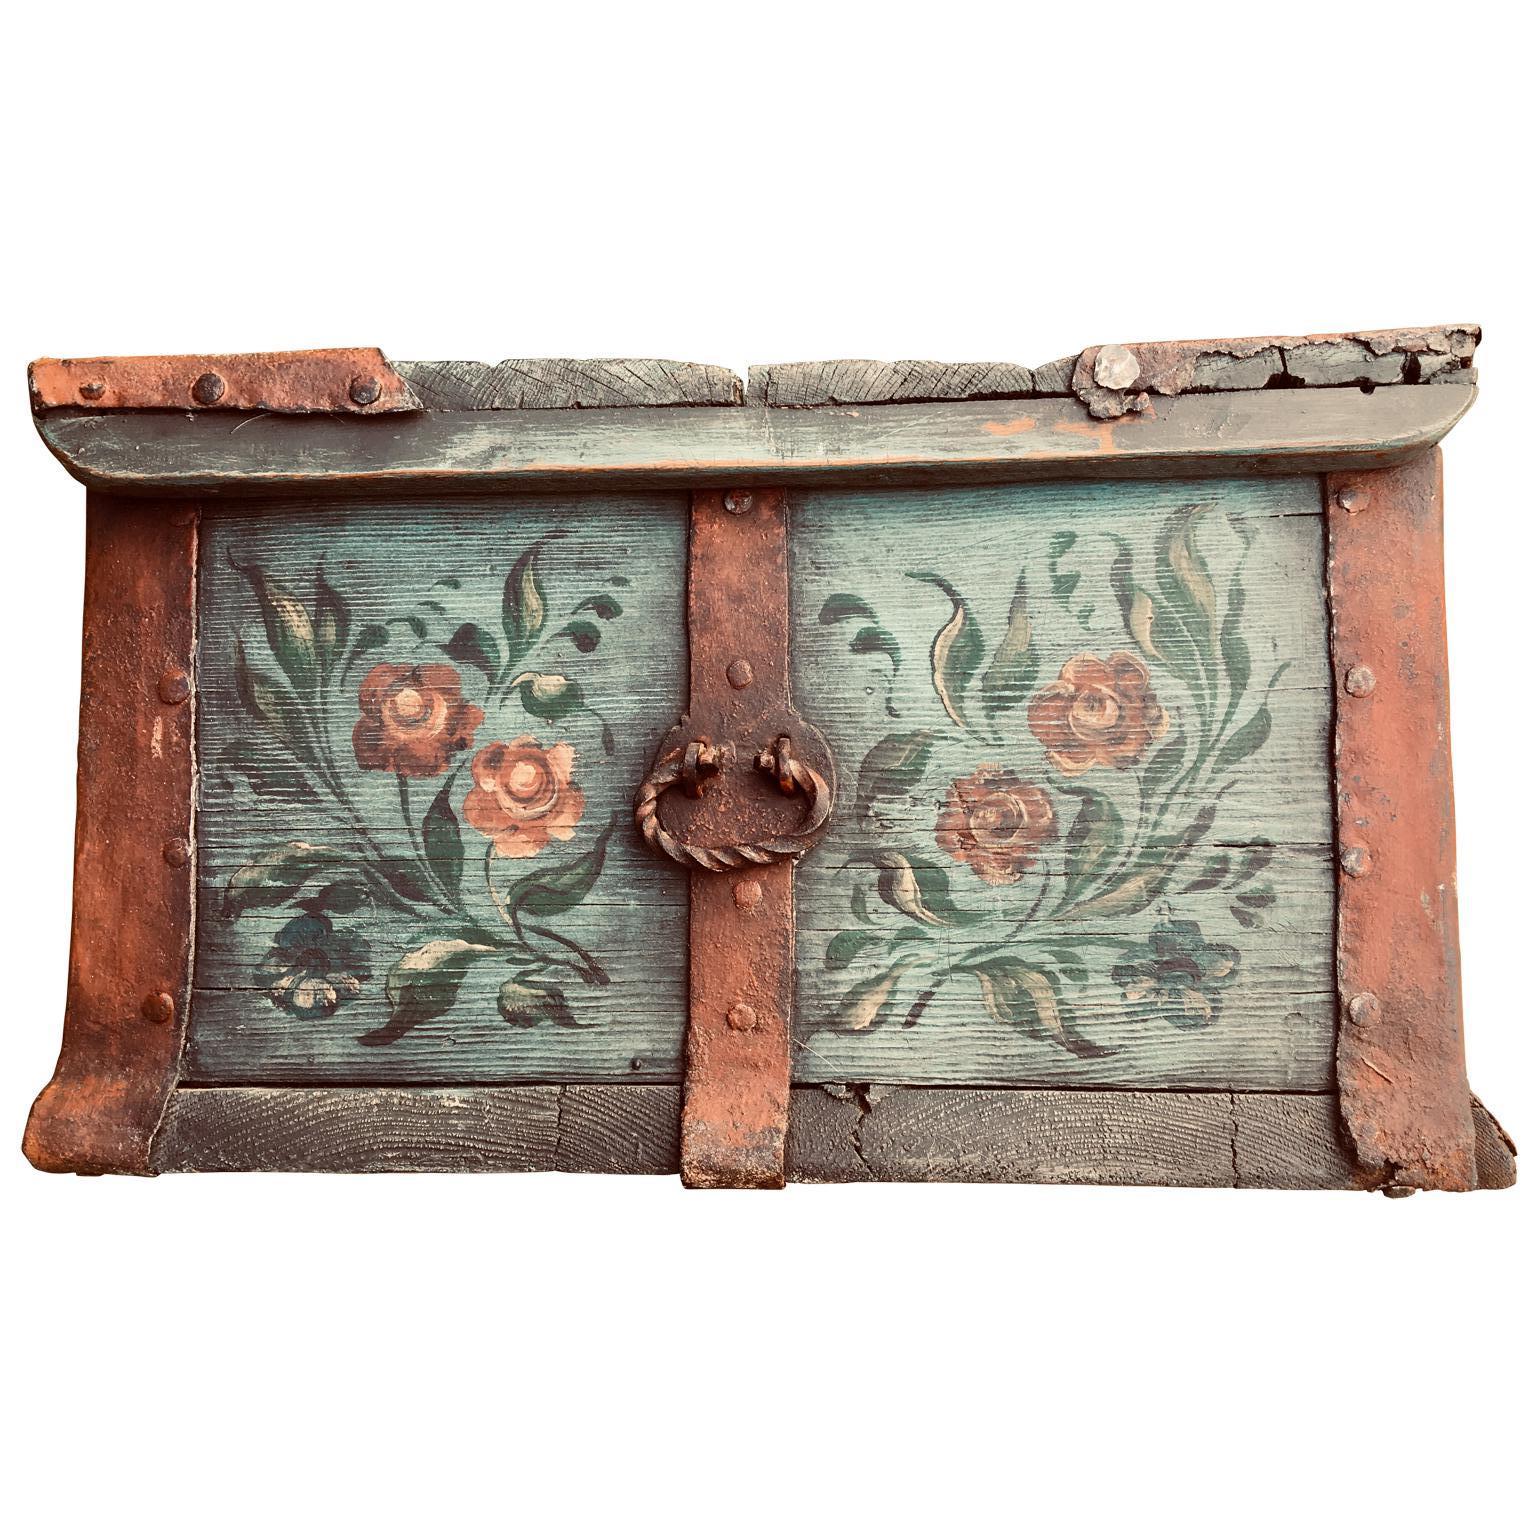 Hand-Crafted Swedish 18th Century Original Painted Decorative Box, Monogrammed & Dated 1792